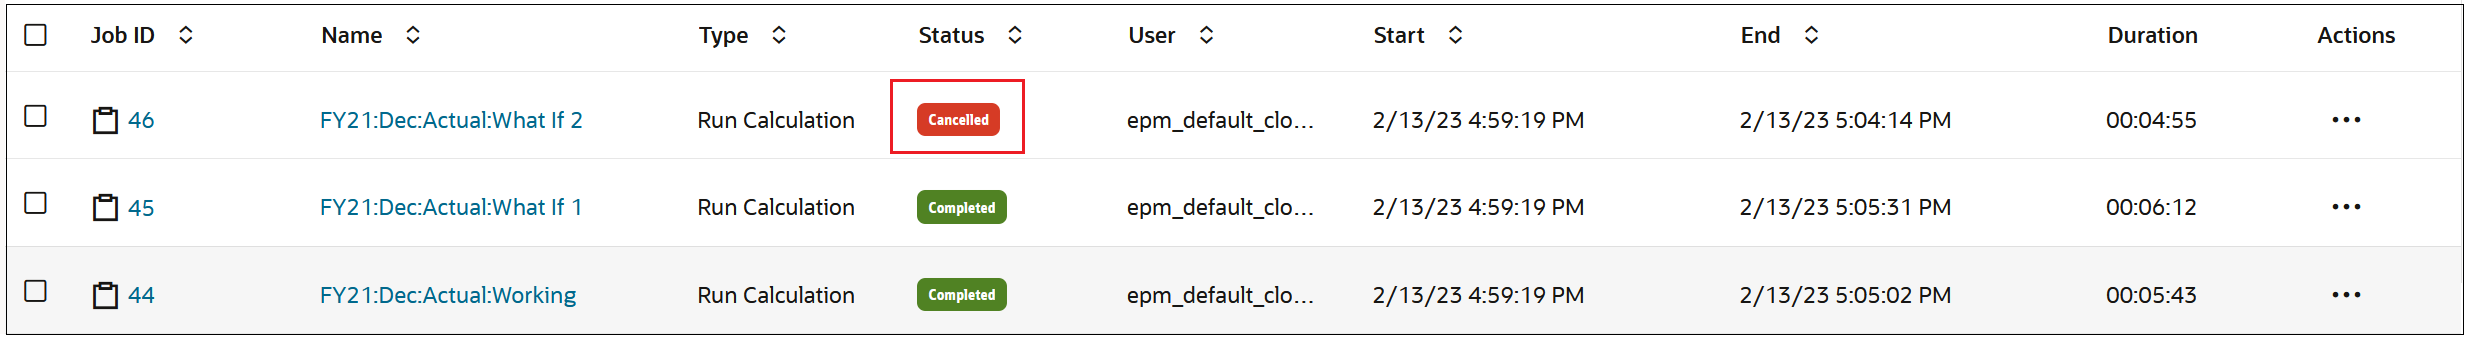 Jobs Console showing a job with a Cancelled status